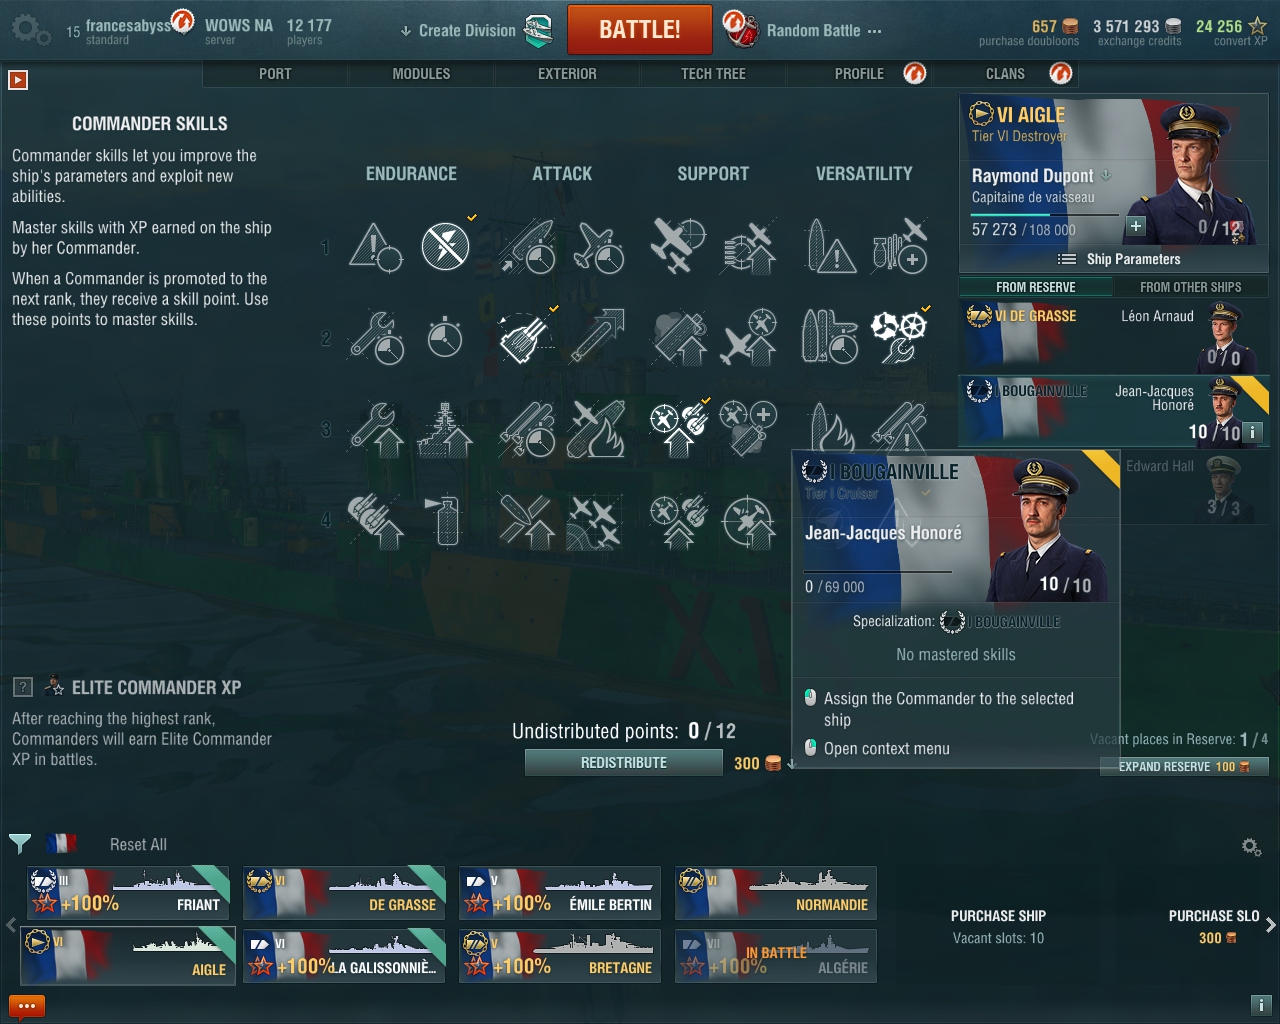 Hello im new and - General Game Discussion - World of Warships official forum